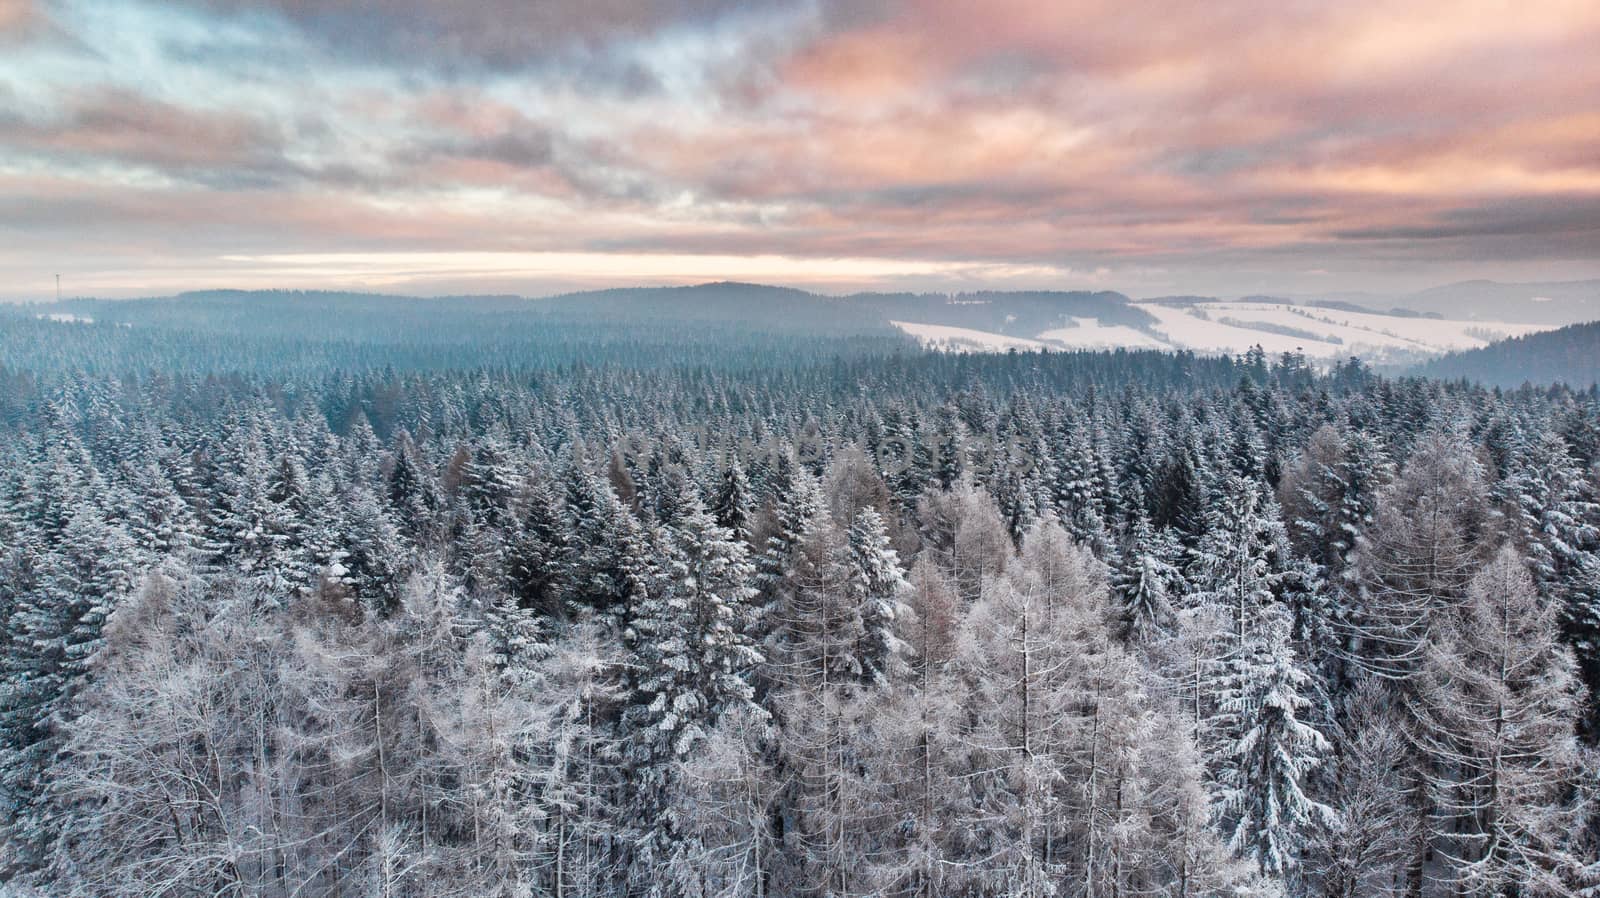 Sunrise Over Snowy Pine Trees. Beautiful Sky and Clouds. Aerial Drone View. Winter Season.